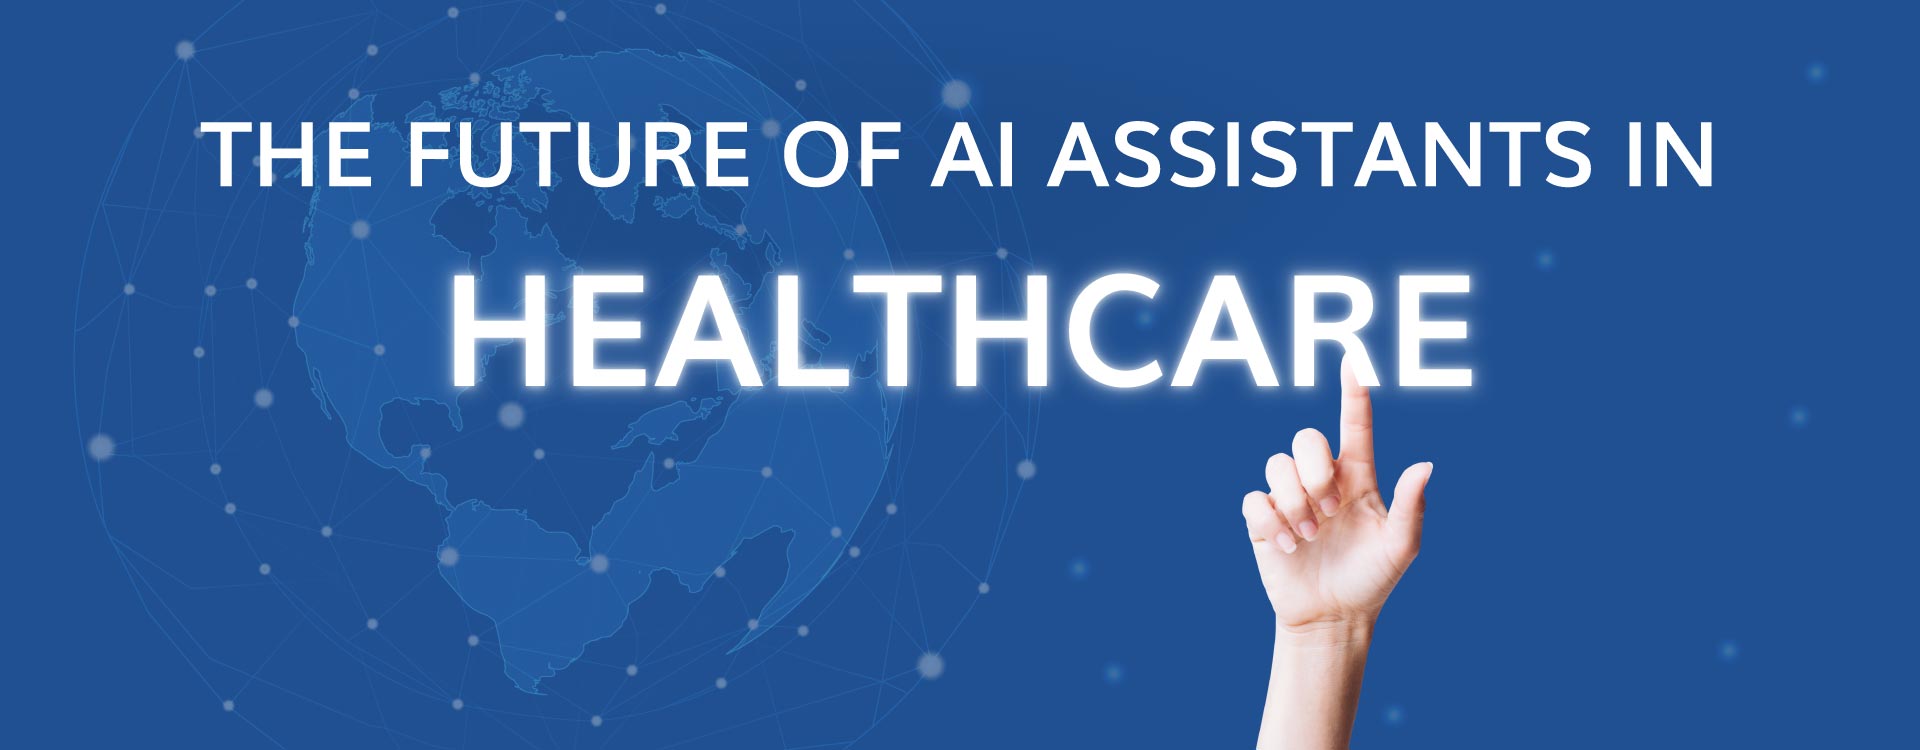 How AI Assistants are transforming the healthcare industry?